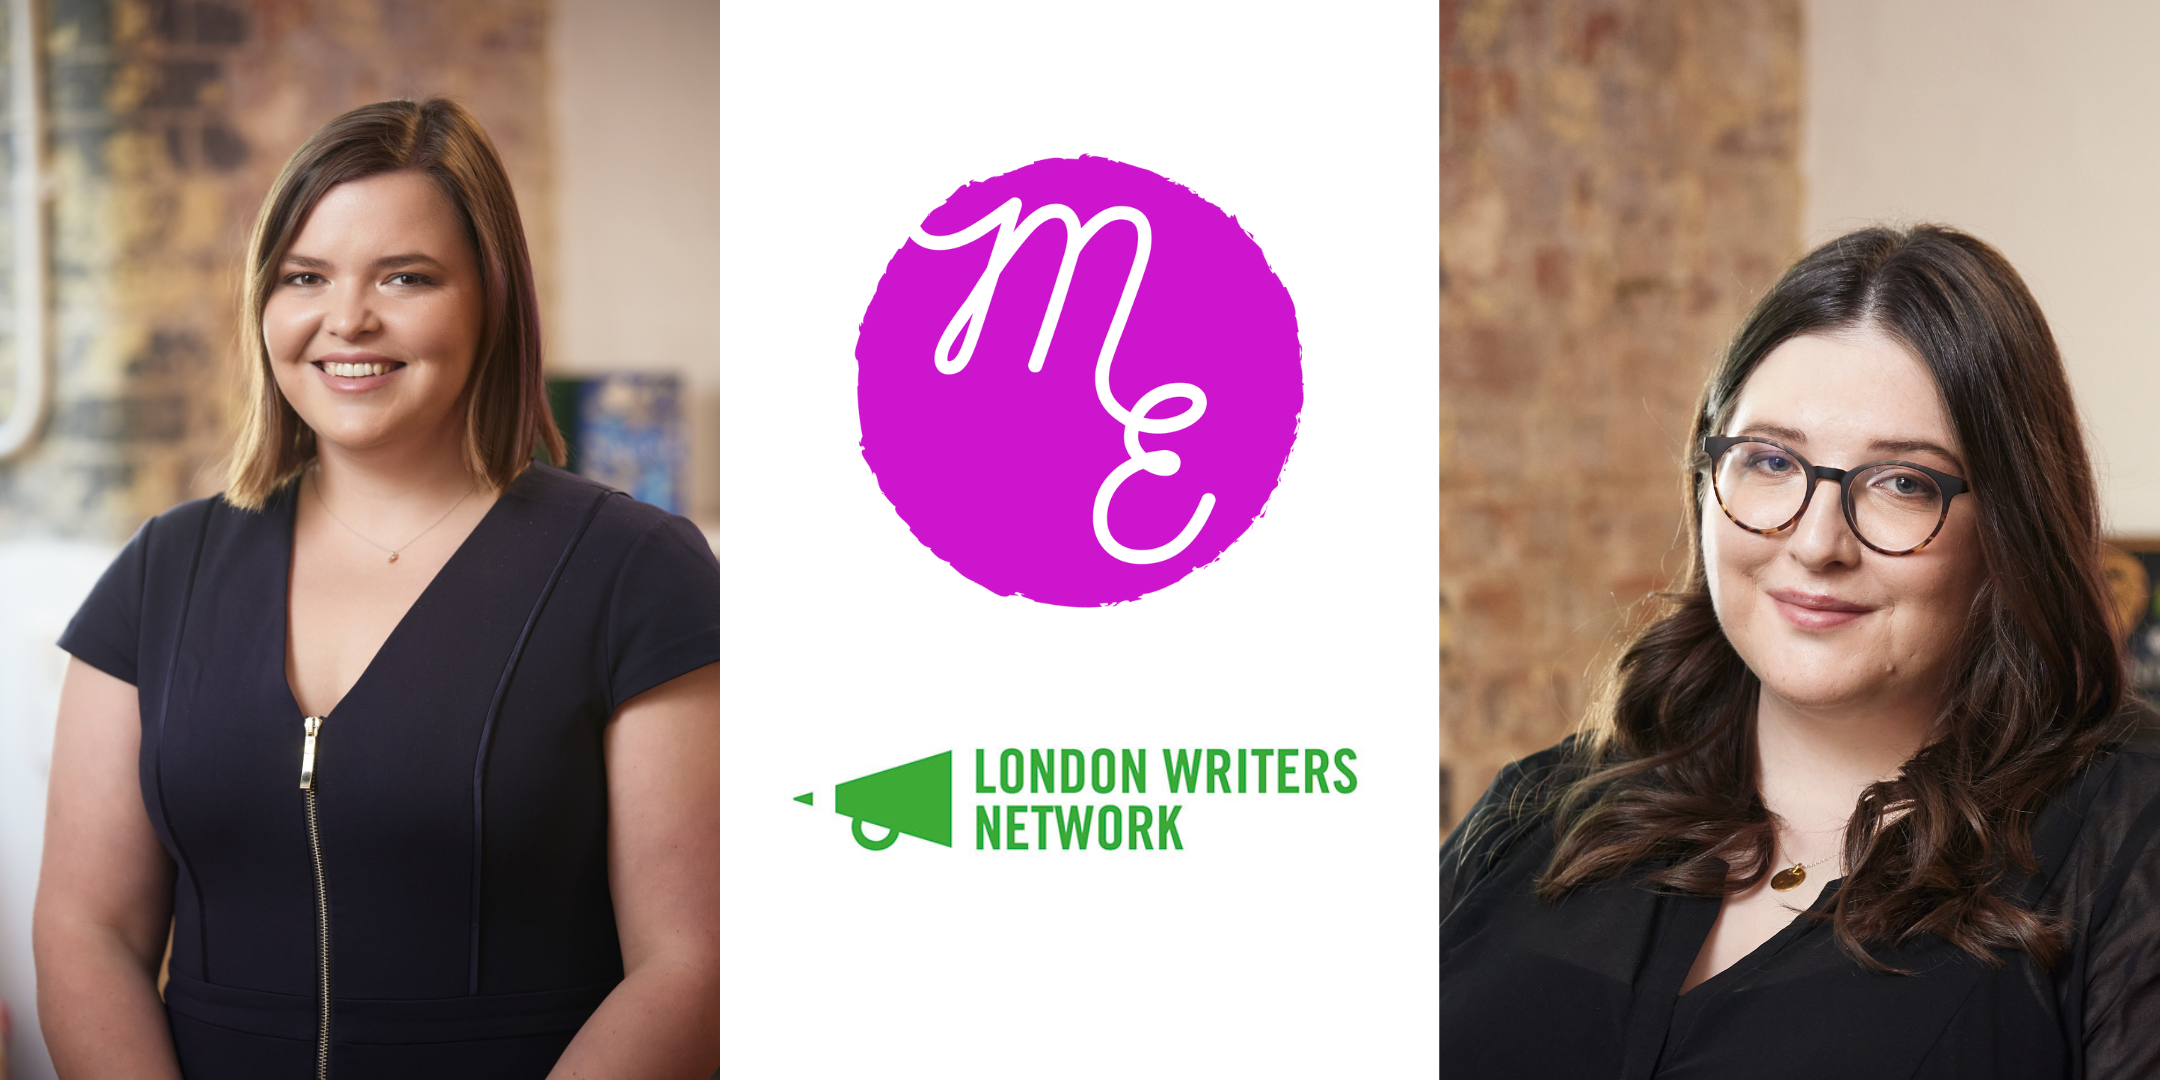 two women wearing black tops looking and smiling at the camera, with the Mushens Entertainment and London Writers Network logos in the middle